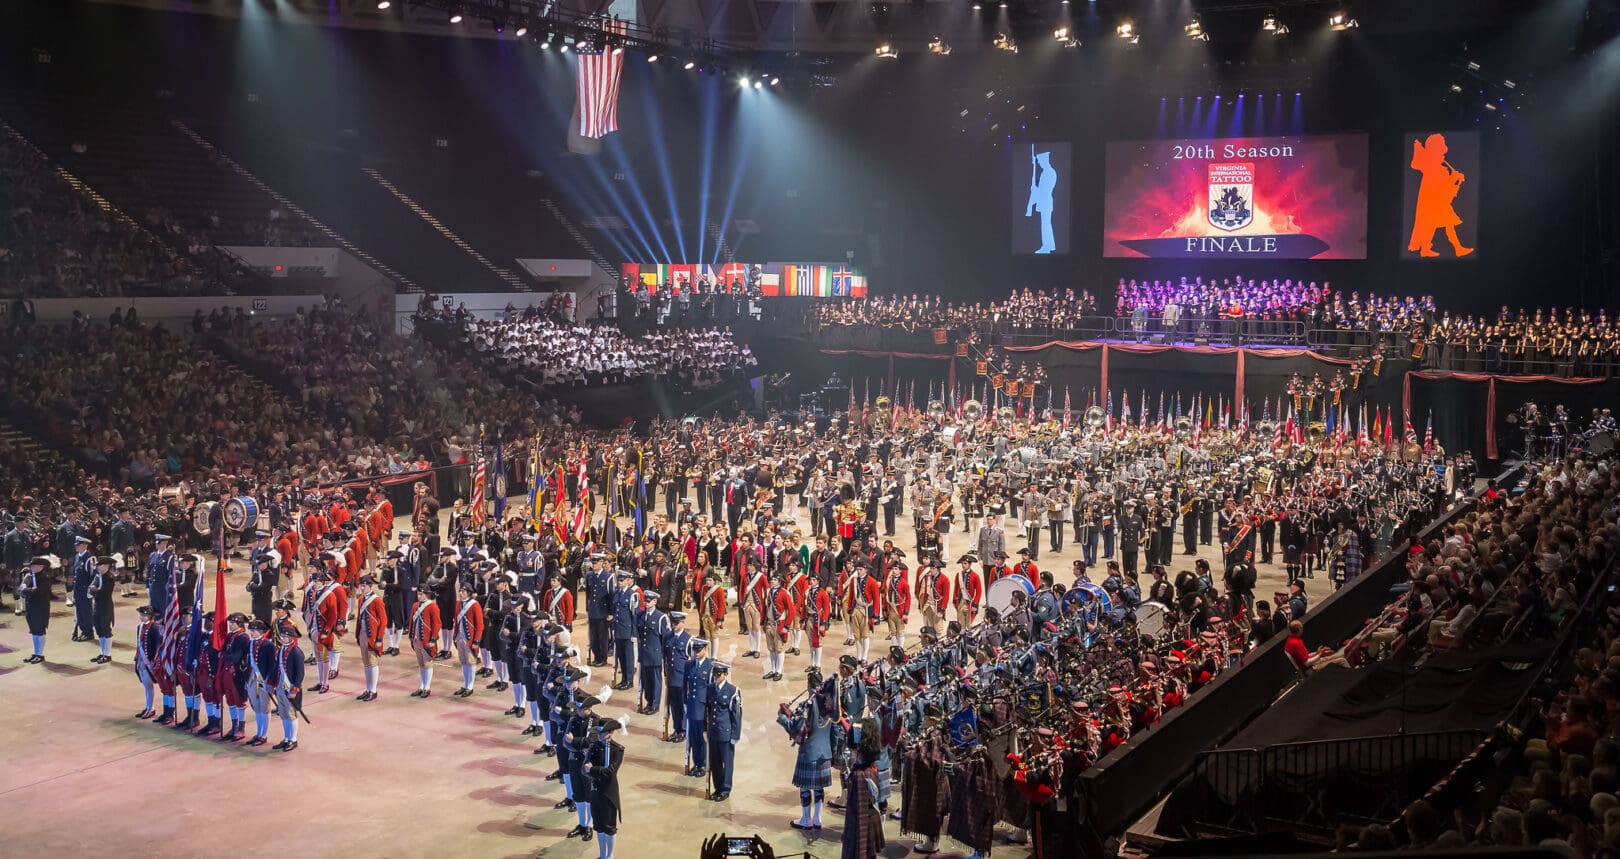 Virginia International Tattoo: Insider Tips to Showcase Your Band Banner Image